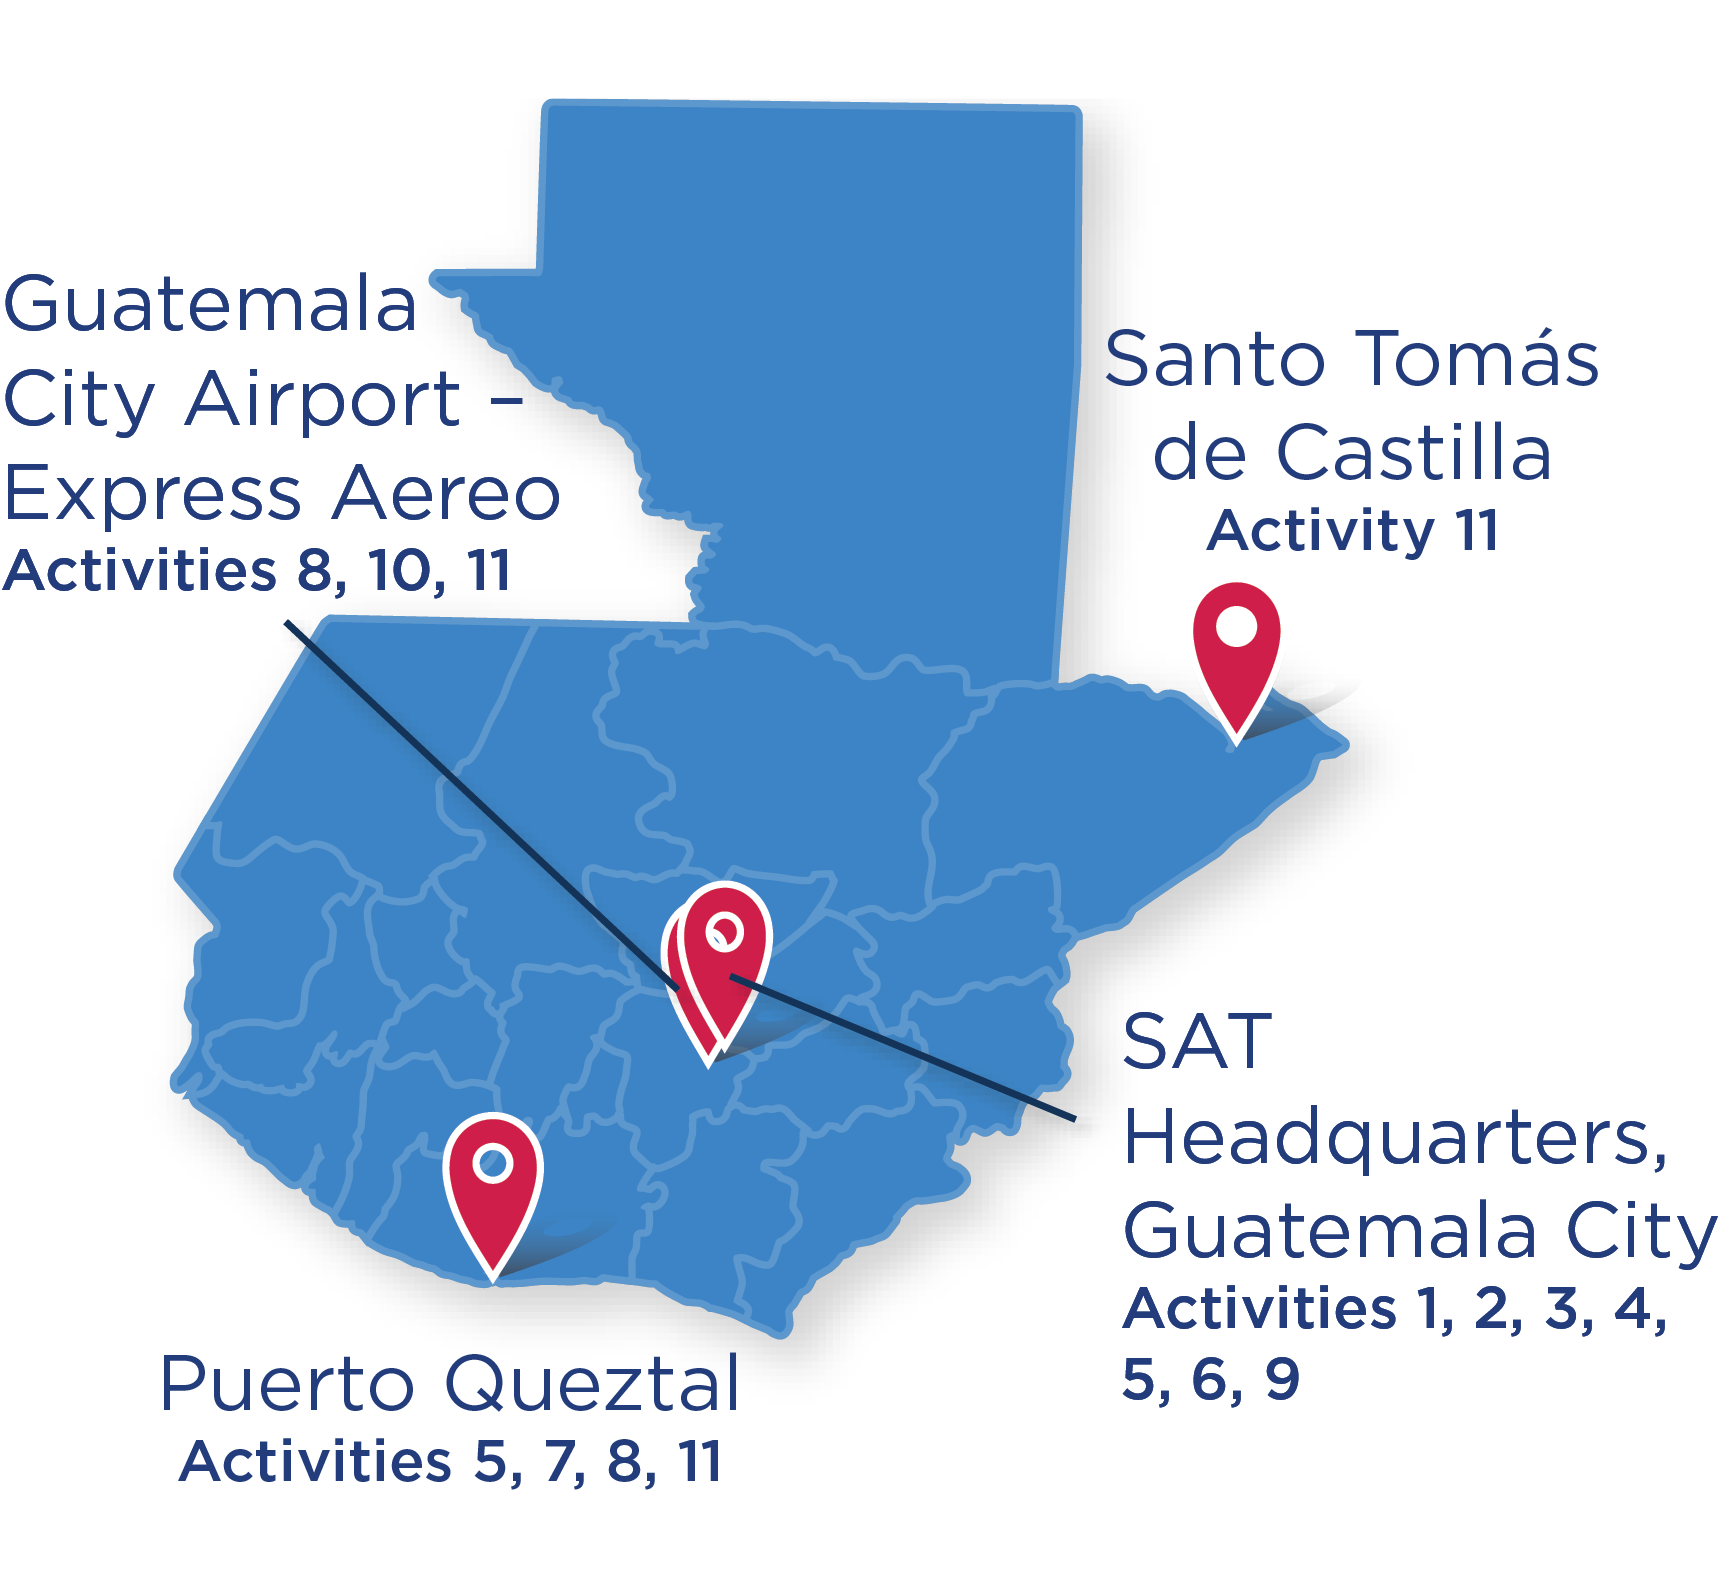 Coverage of the project included Santo Tomas da Castilla for Activity 11; Guatemala City Airport, Express Aereo for Activity 12; and Puerto Queztal for Activities 5, 7, 8 and 11. 